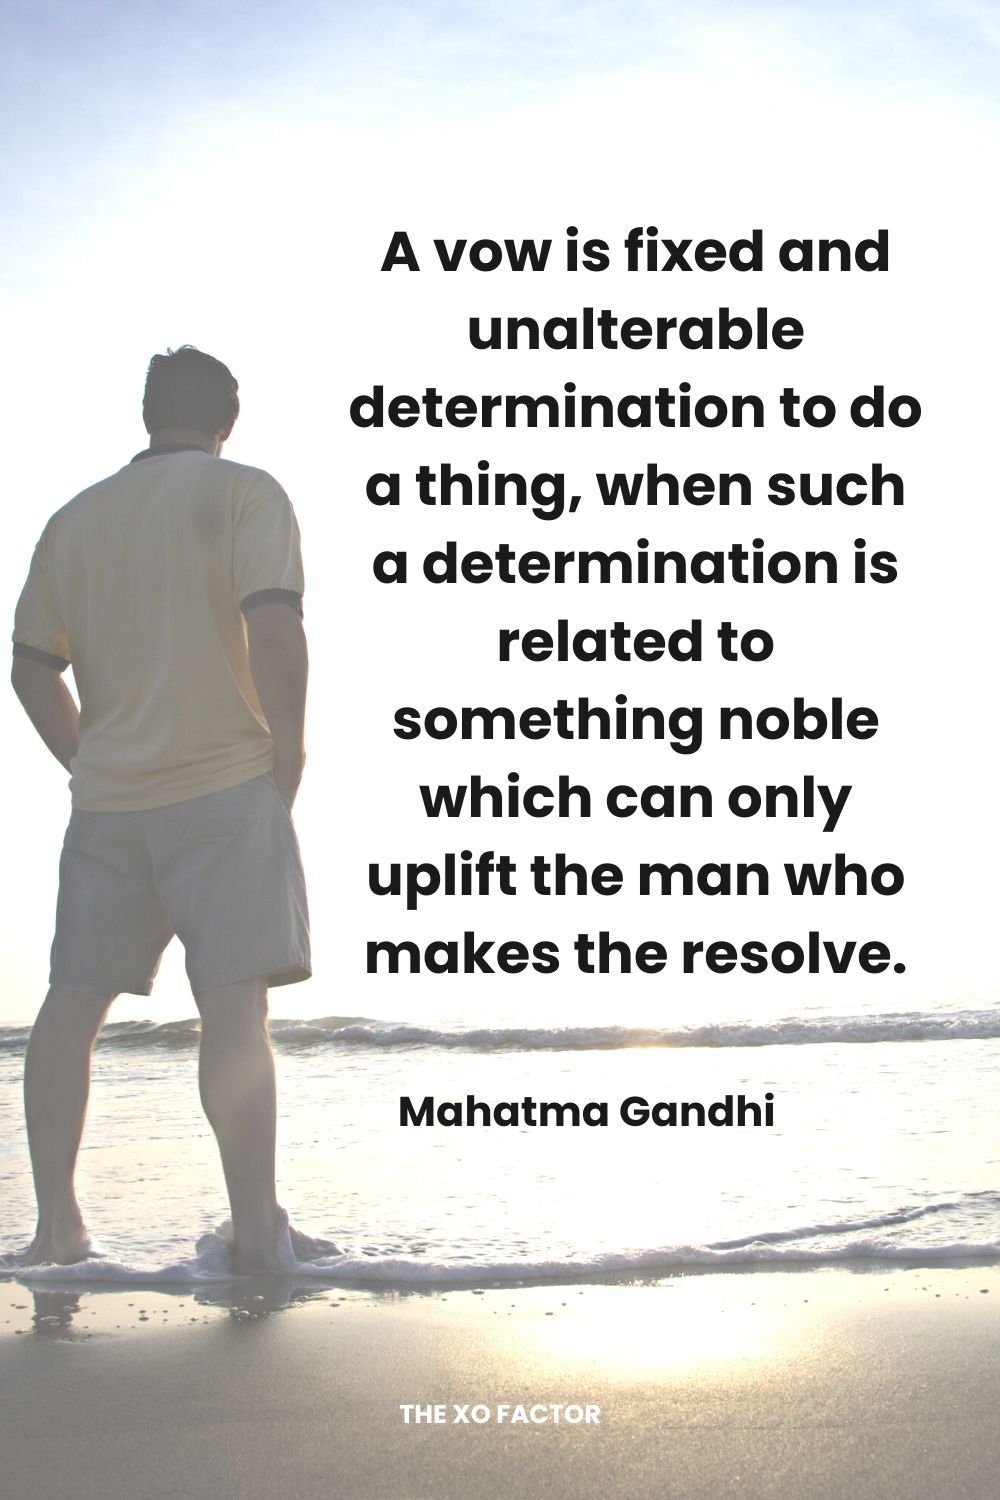 A vow is fixed and unalterable determination to do a thing, when such a determination is related to something noble which can only uplift the man who makes the resolve. Mahatma Gandhi